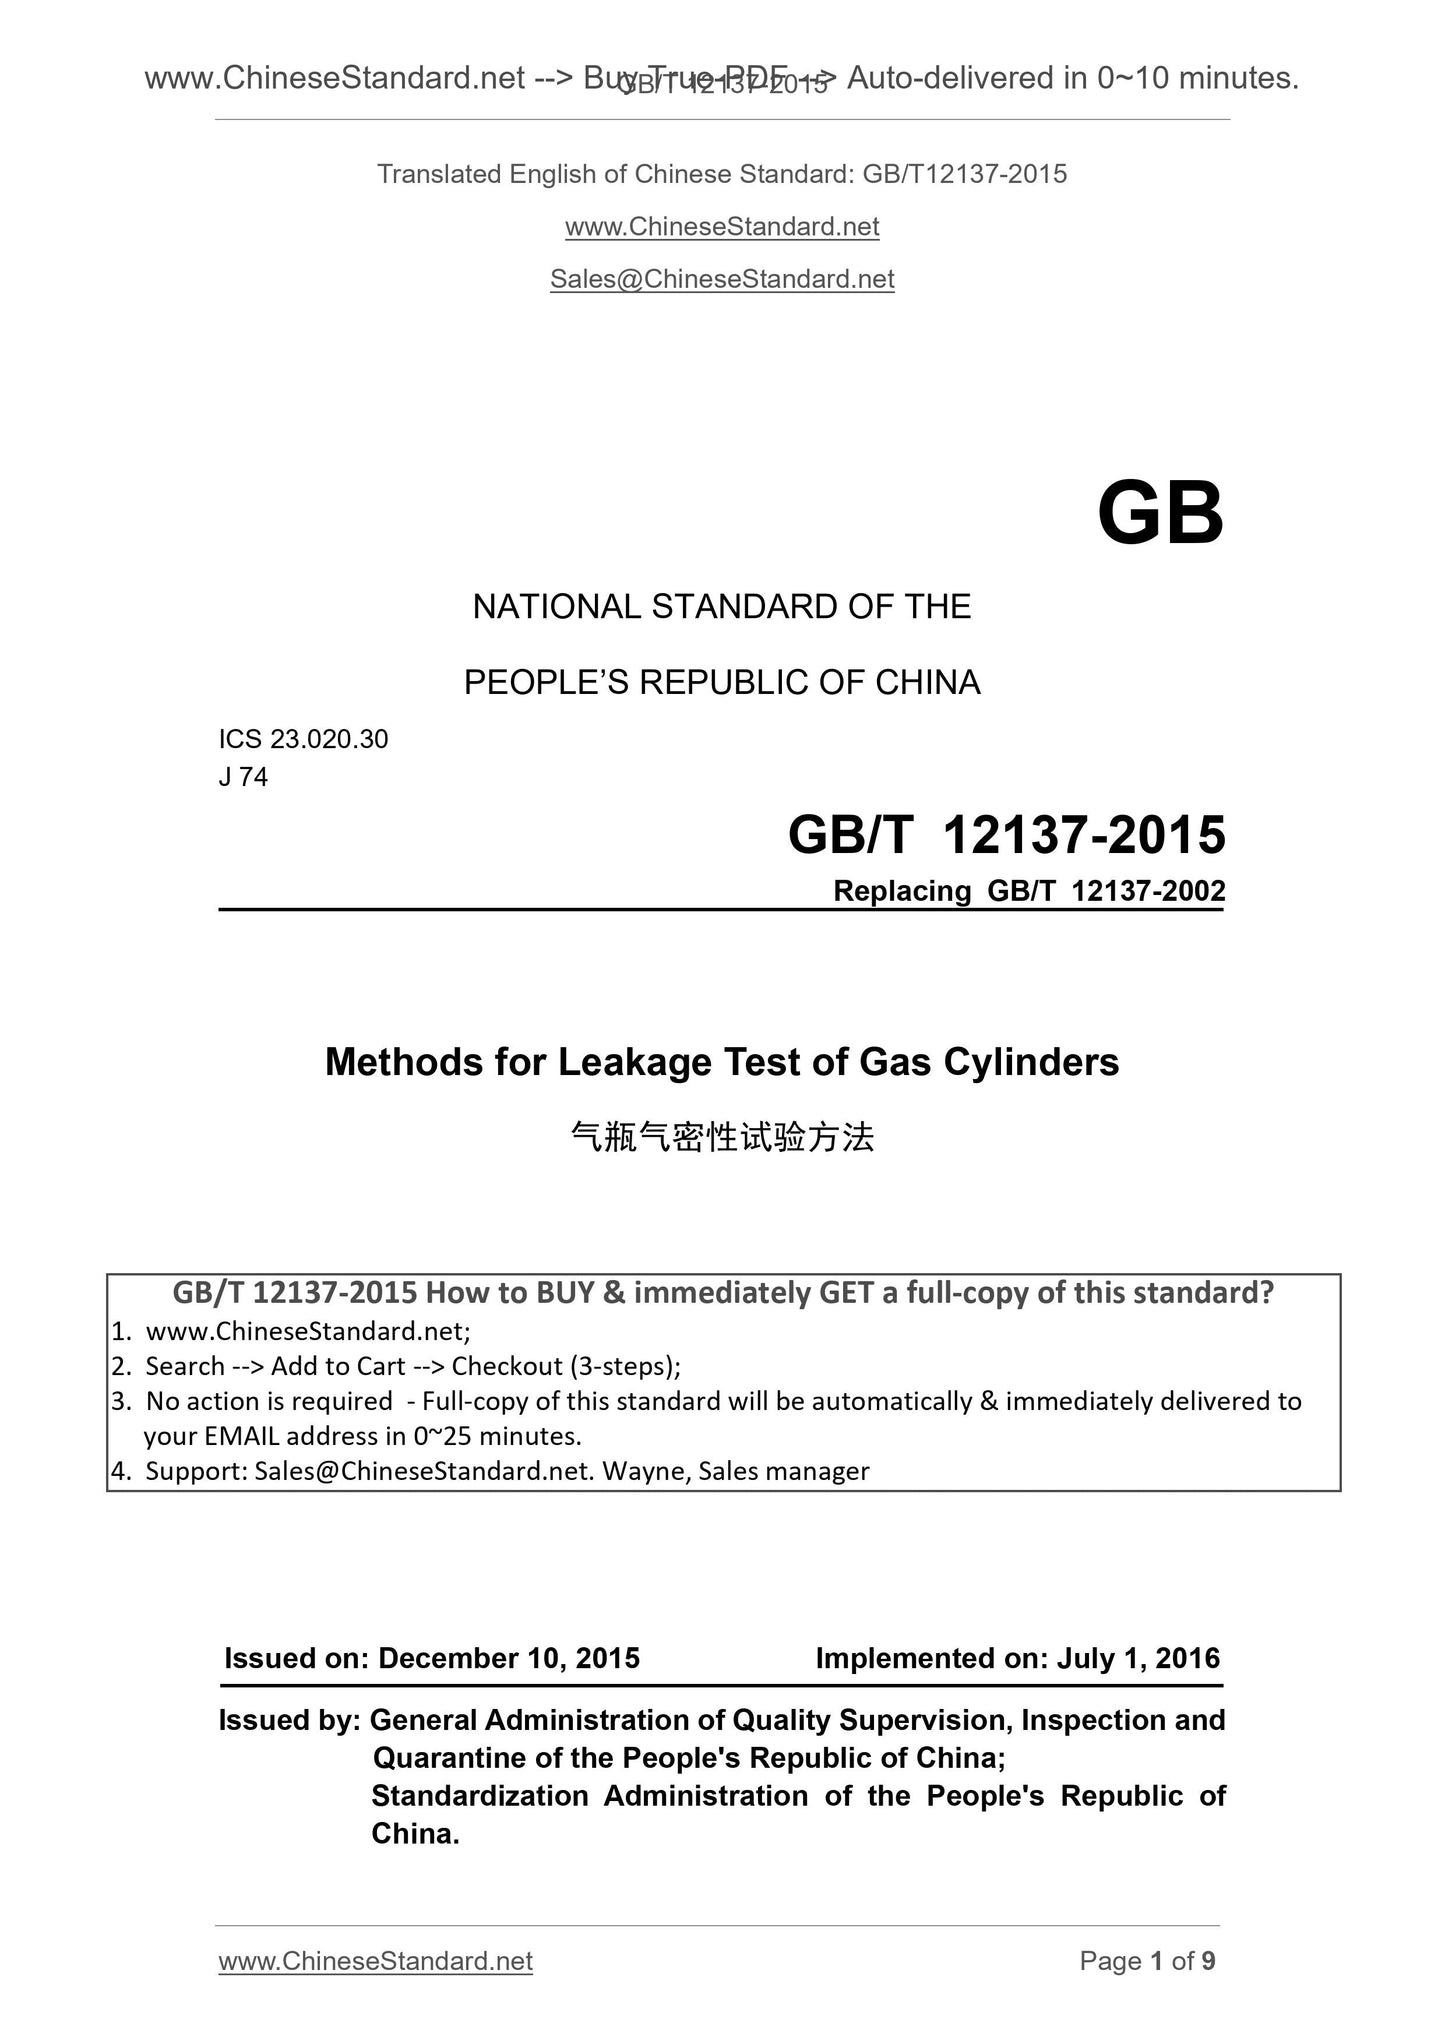 GB/T 12137-2015 Page 1